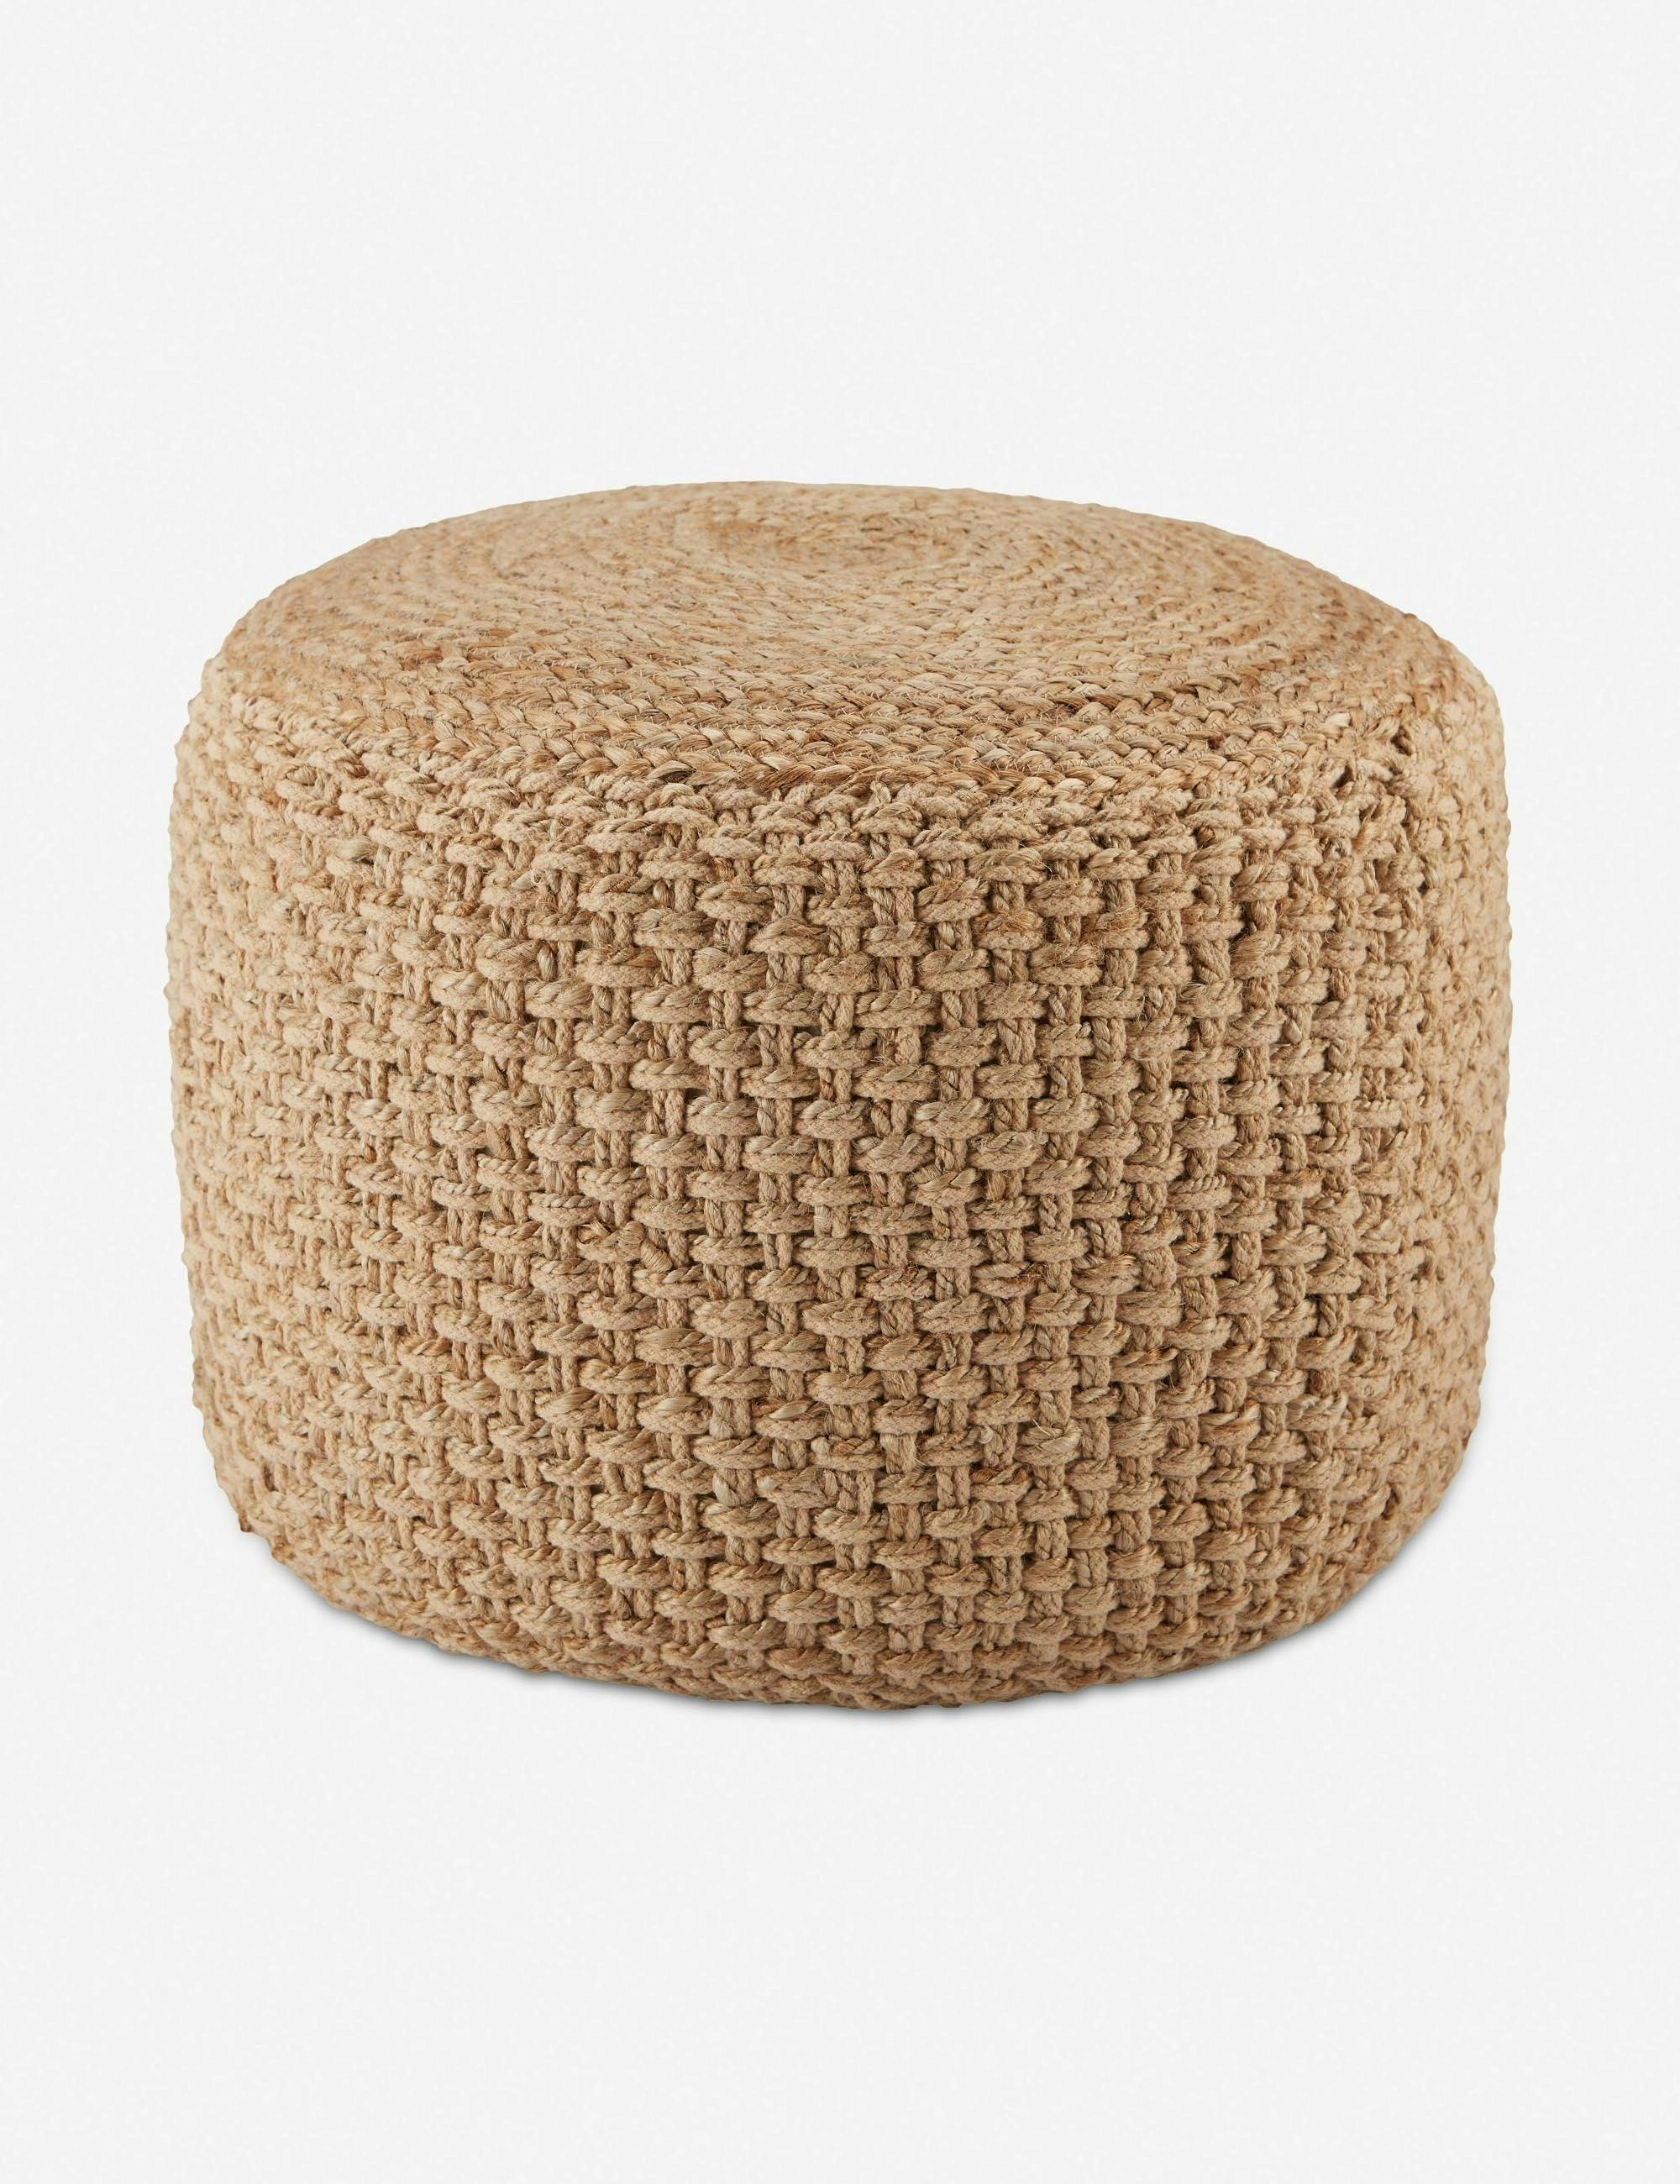 Handwoven Jute and Cotton Round Pouf in Beige and Gray